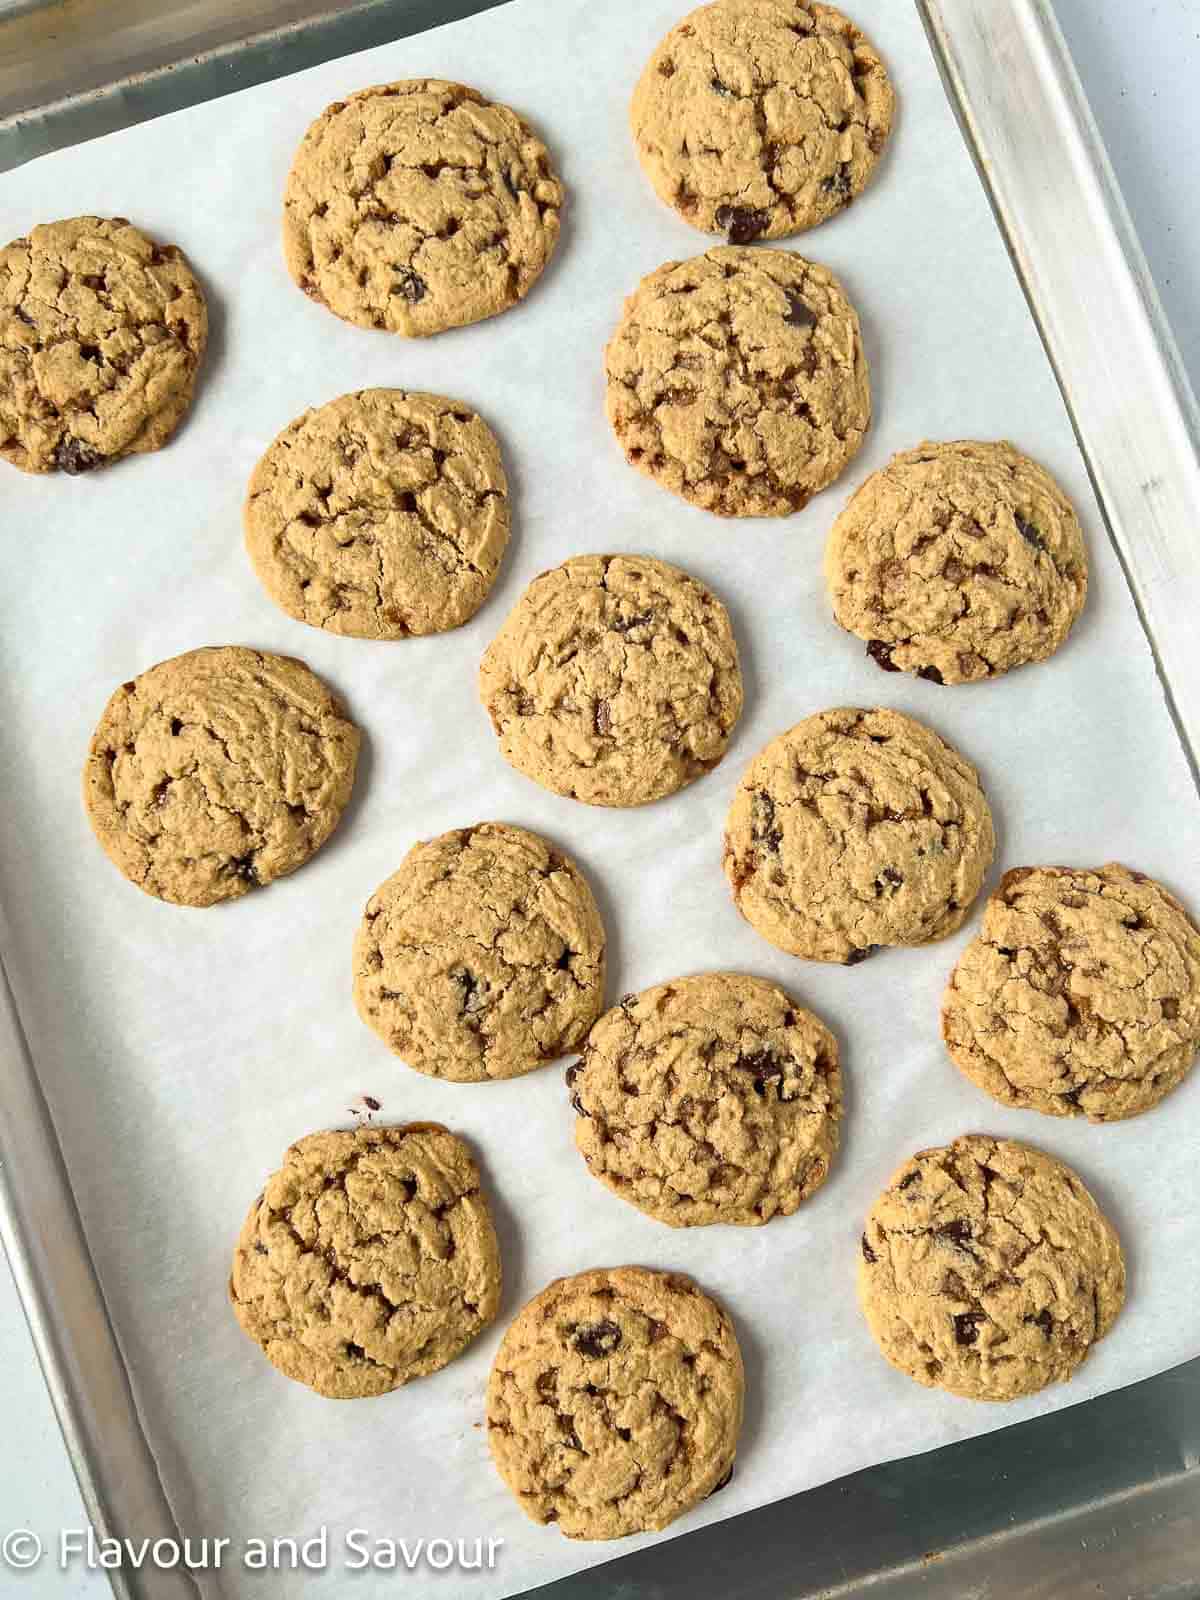 A baking sheet with a batch of cookies.